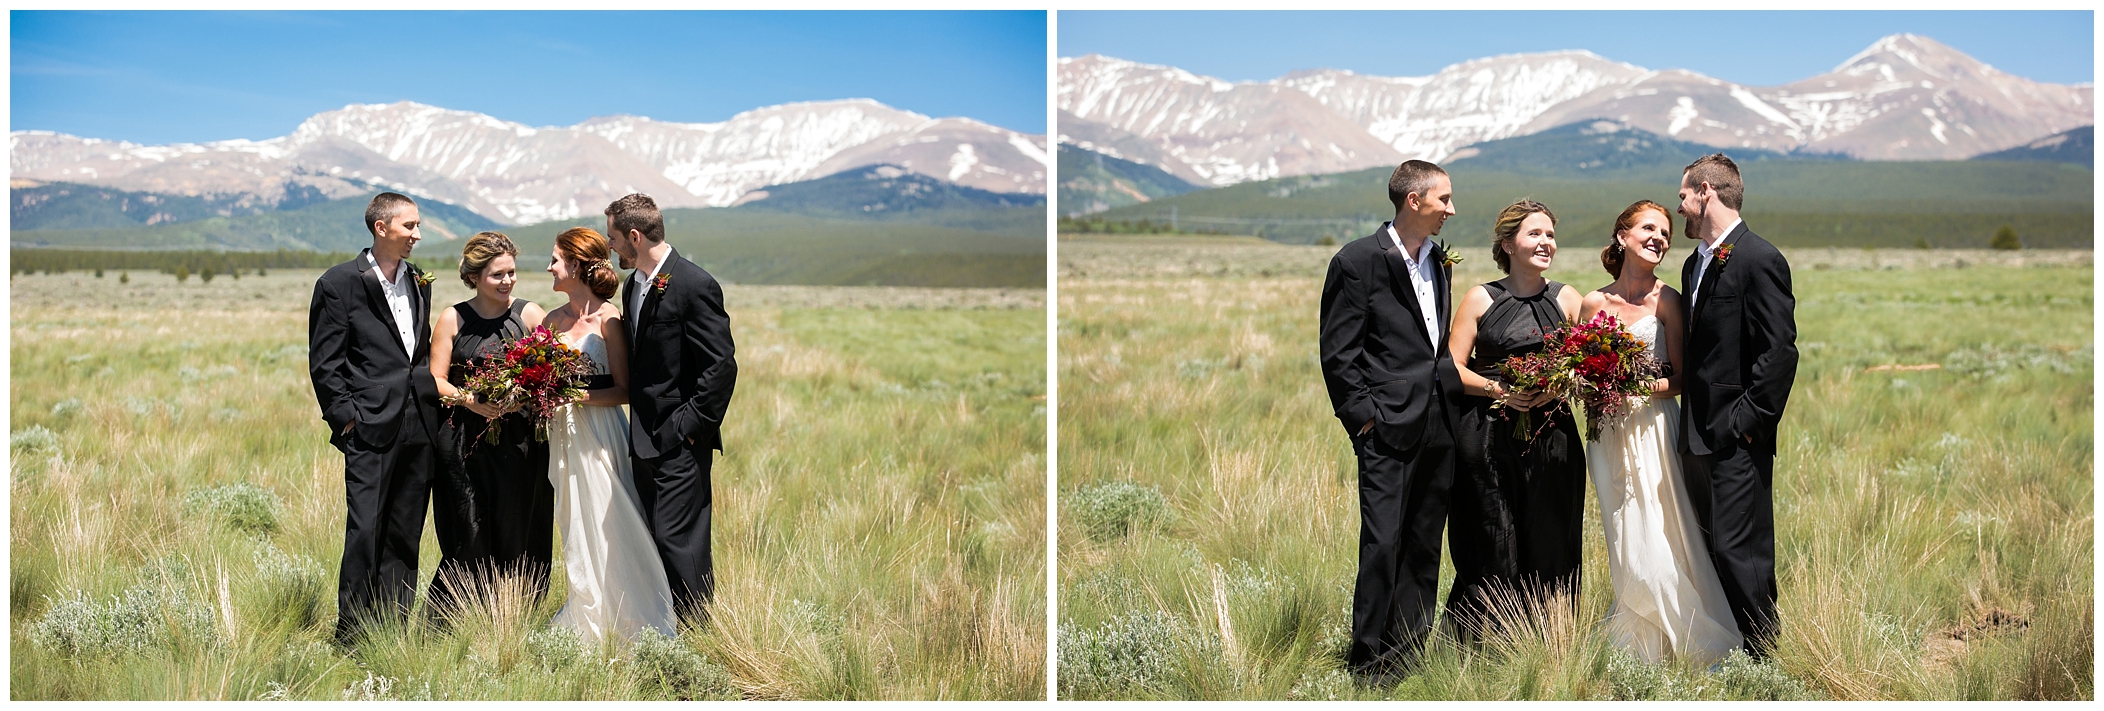 picture of Vail wedding photos 